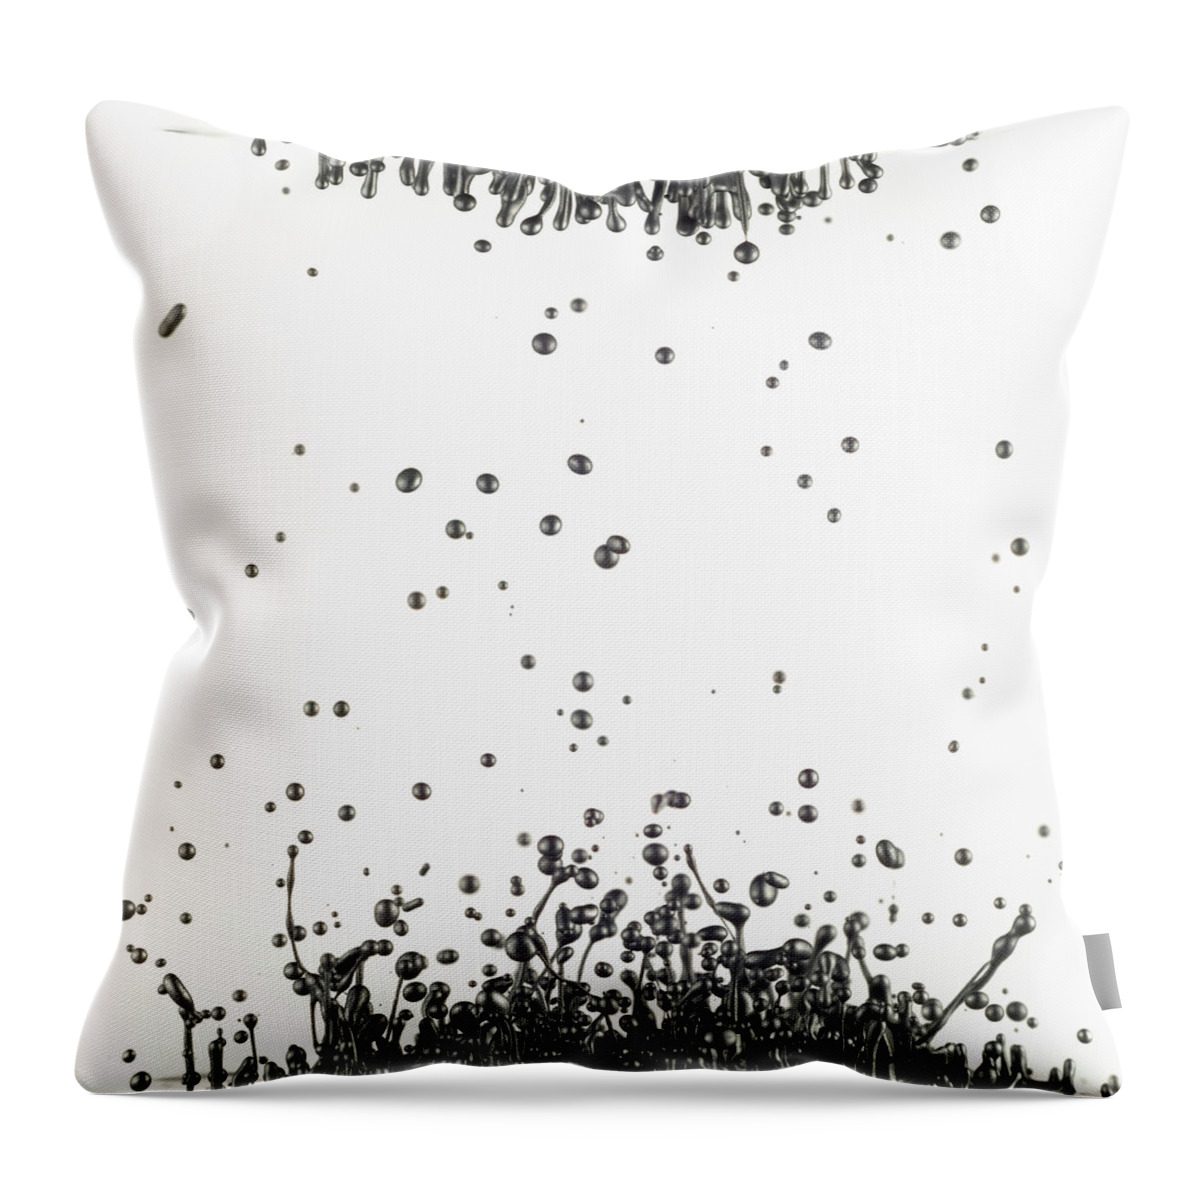 White Background Throw Pillow featuring the photograph Metallic Liquid by Don Farrall